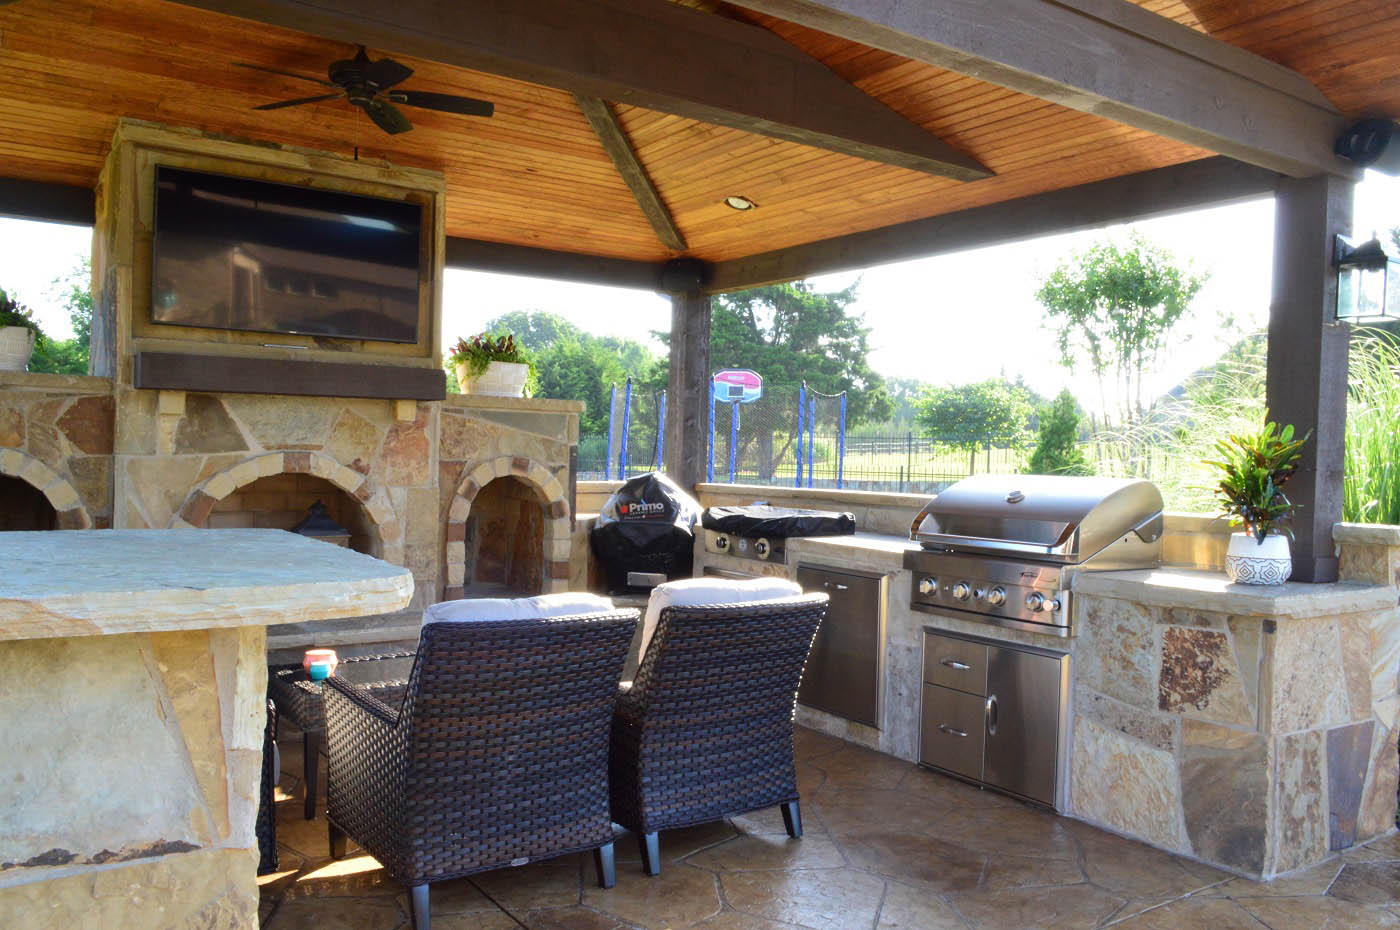 Outdoor Fireplaces & Fire Pits | Photo Gallery